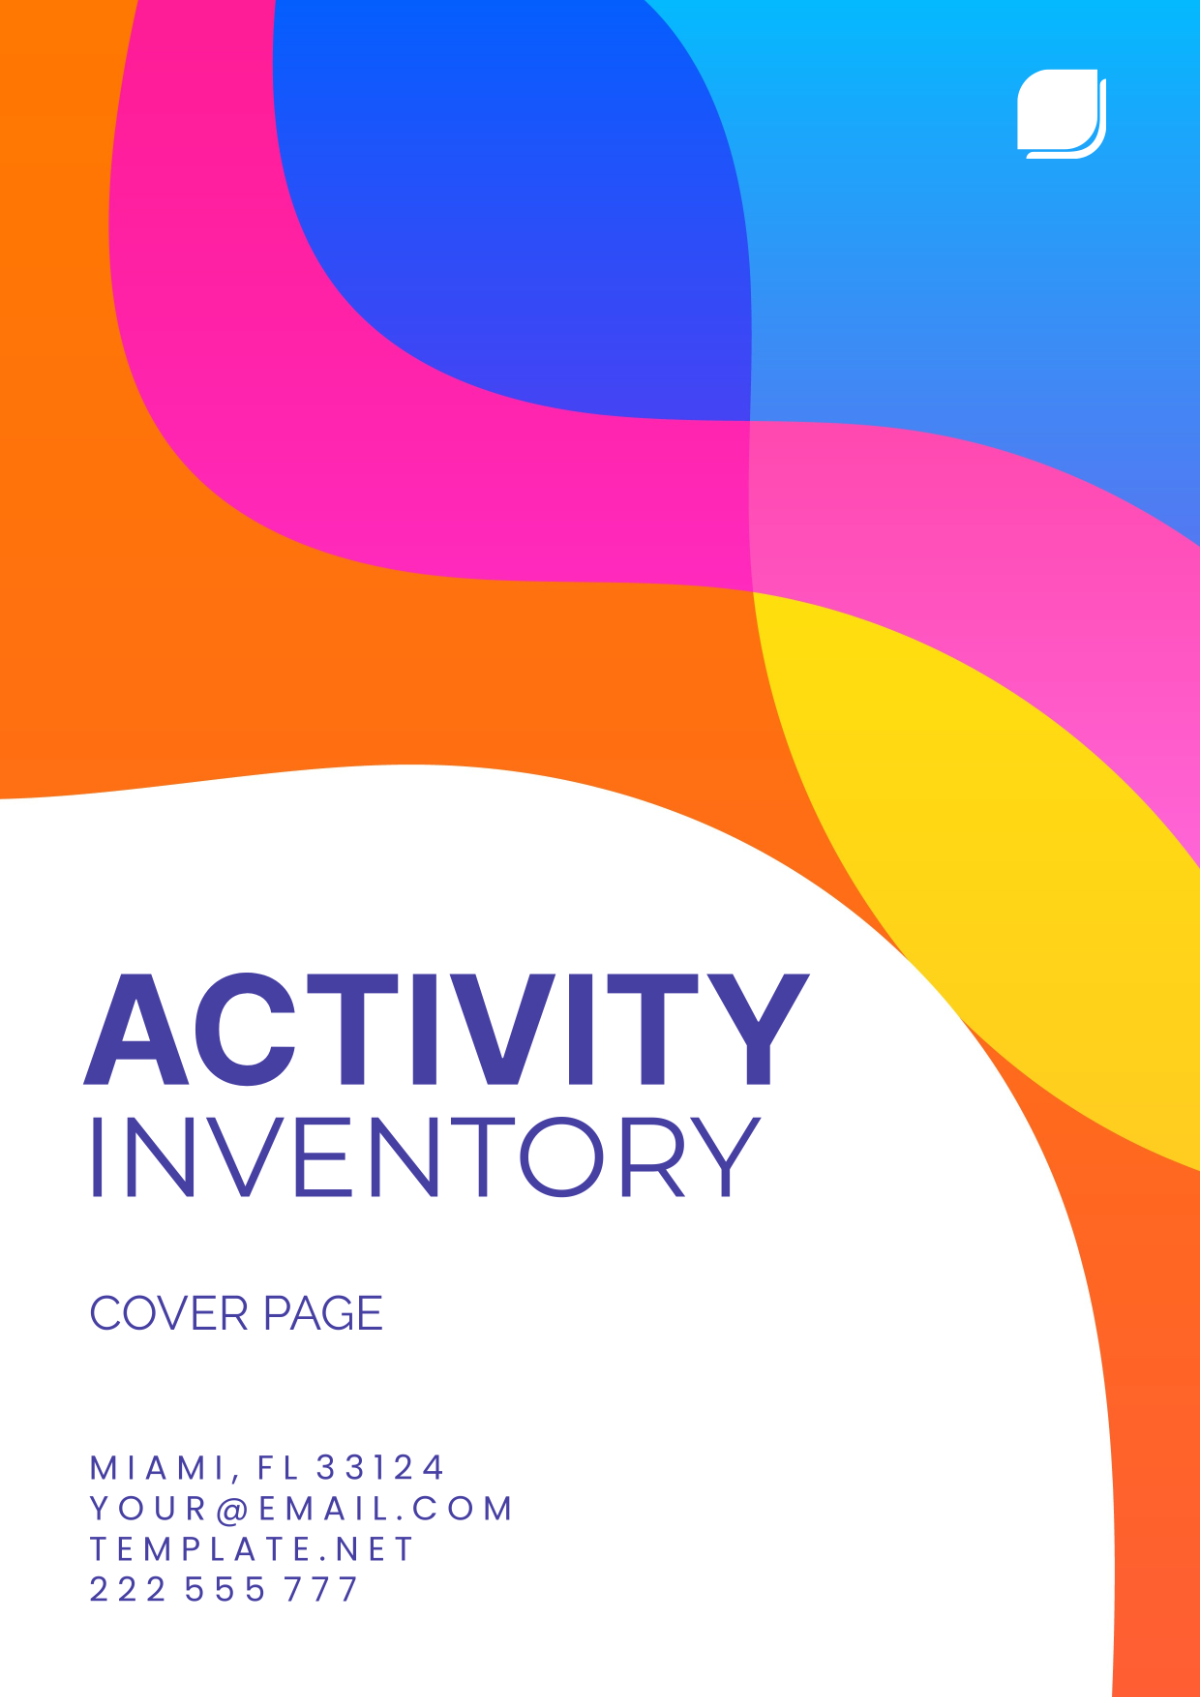 Activity Inventory Cover Page Template